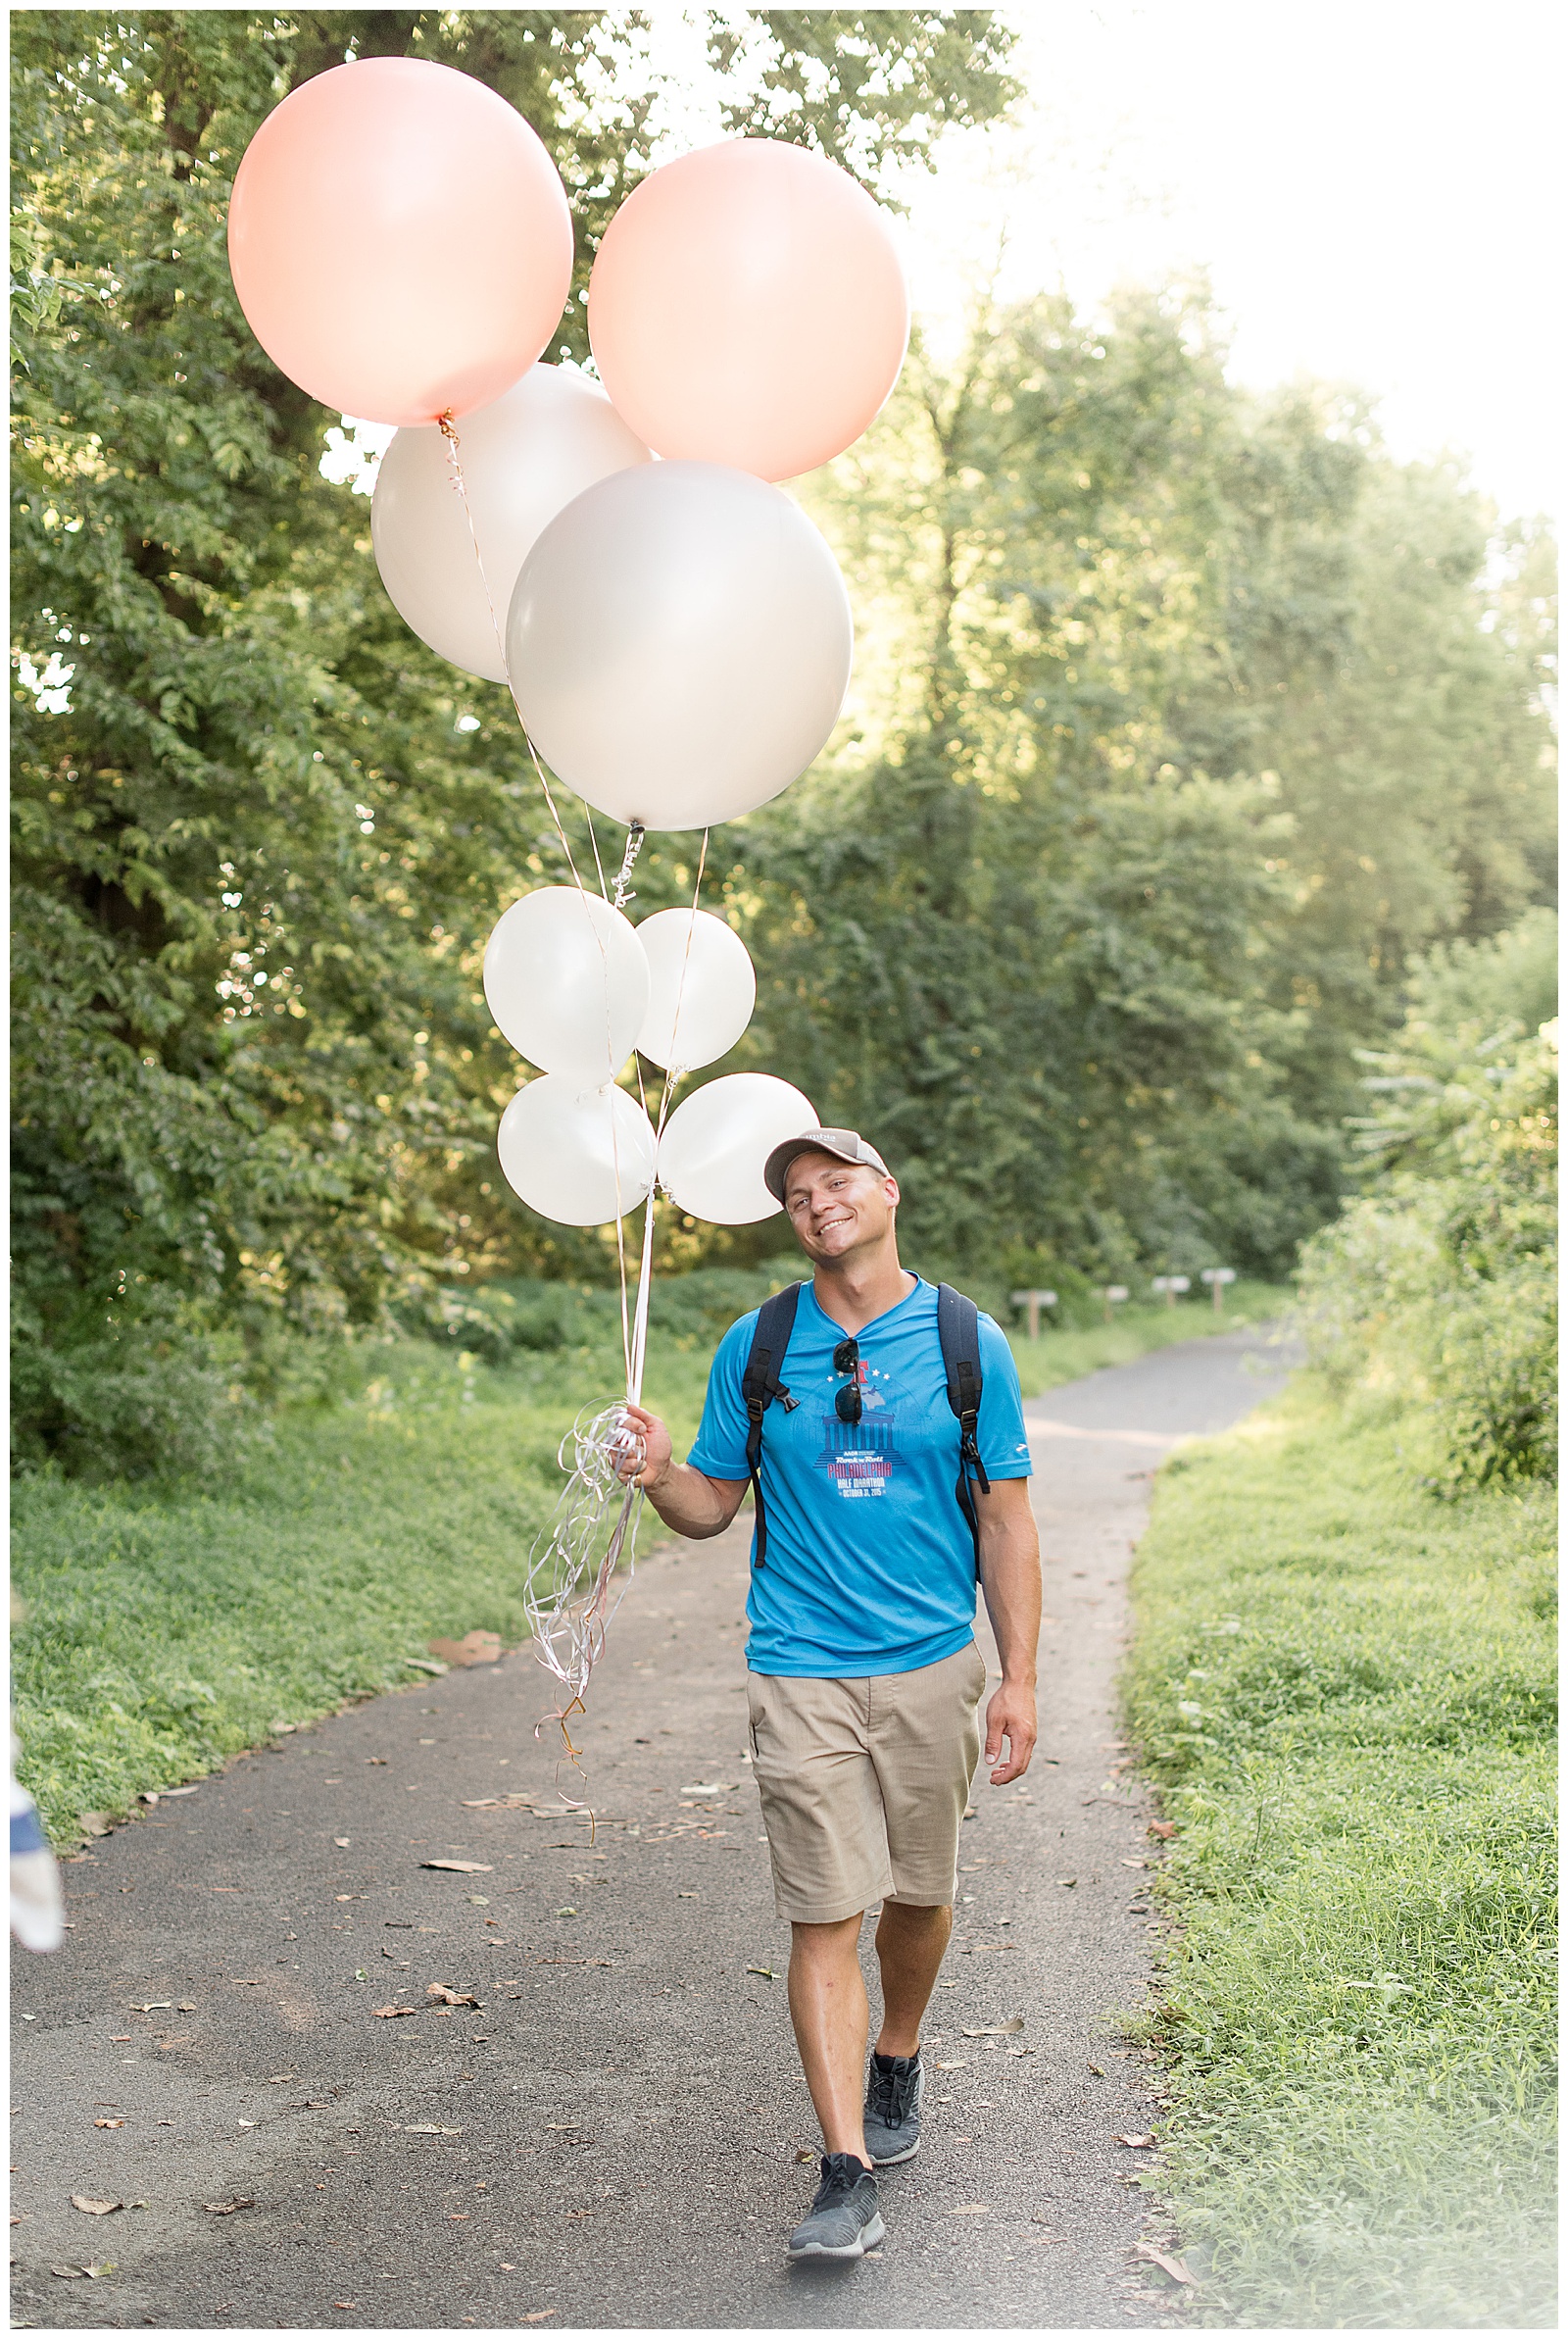 guy smiling walking with ballons